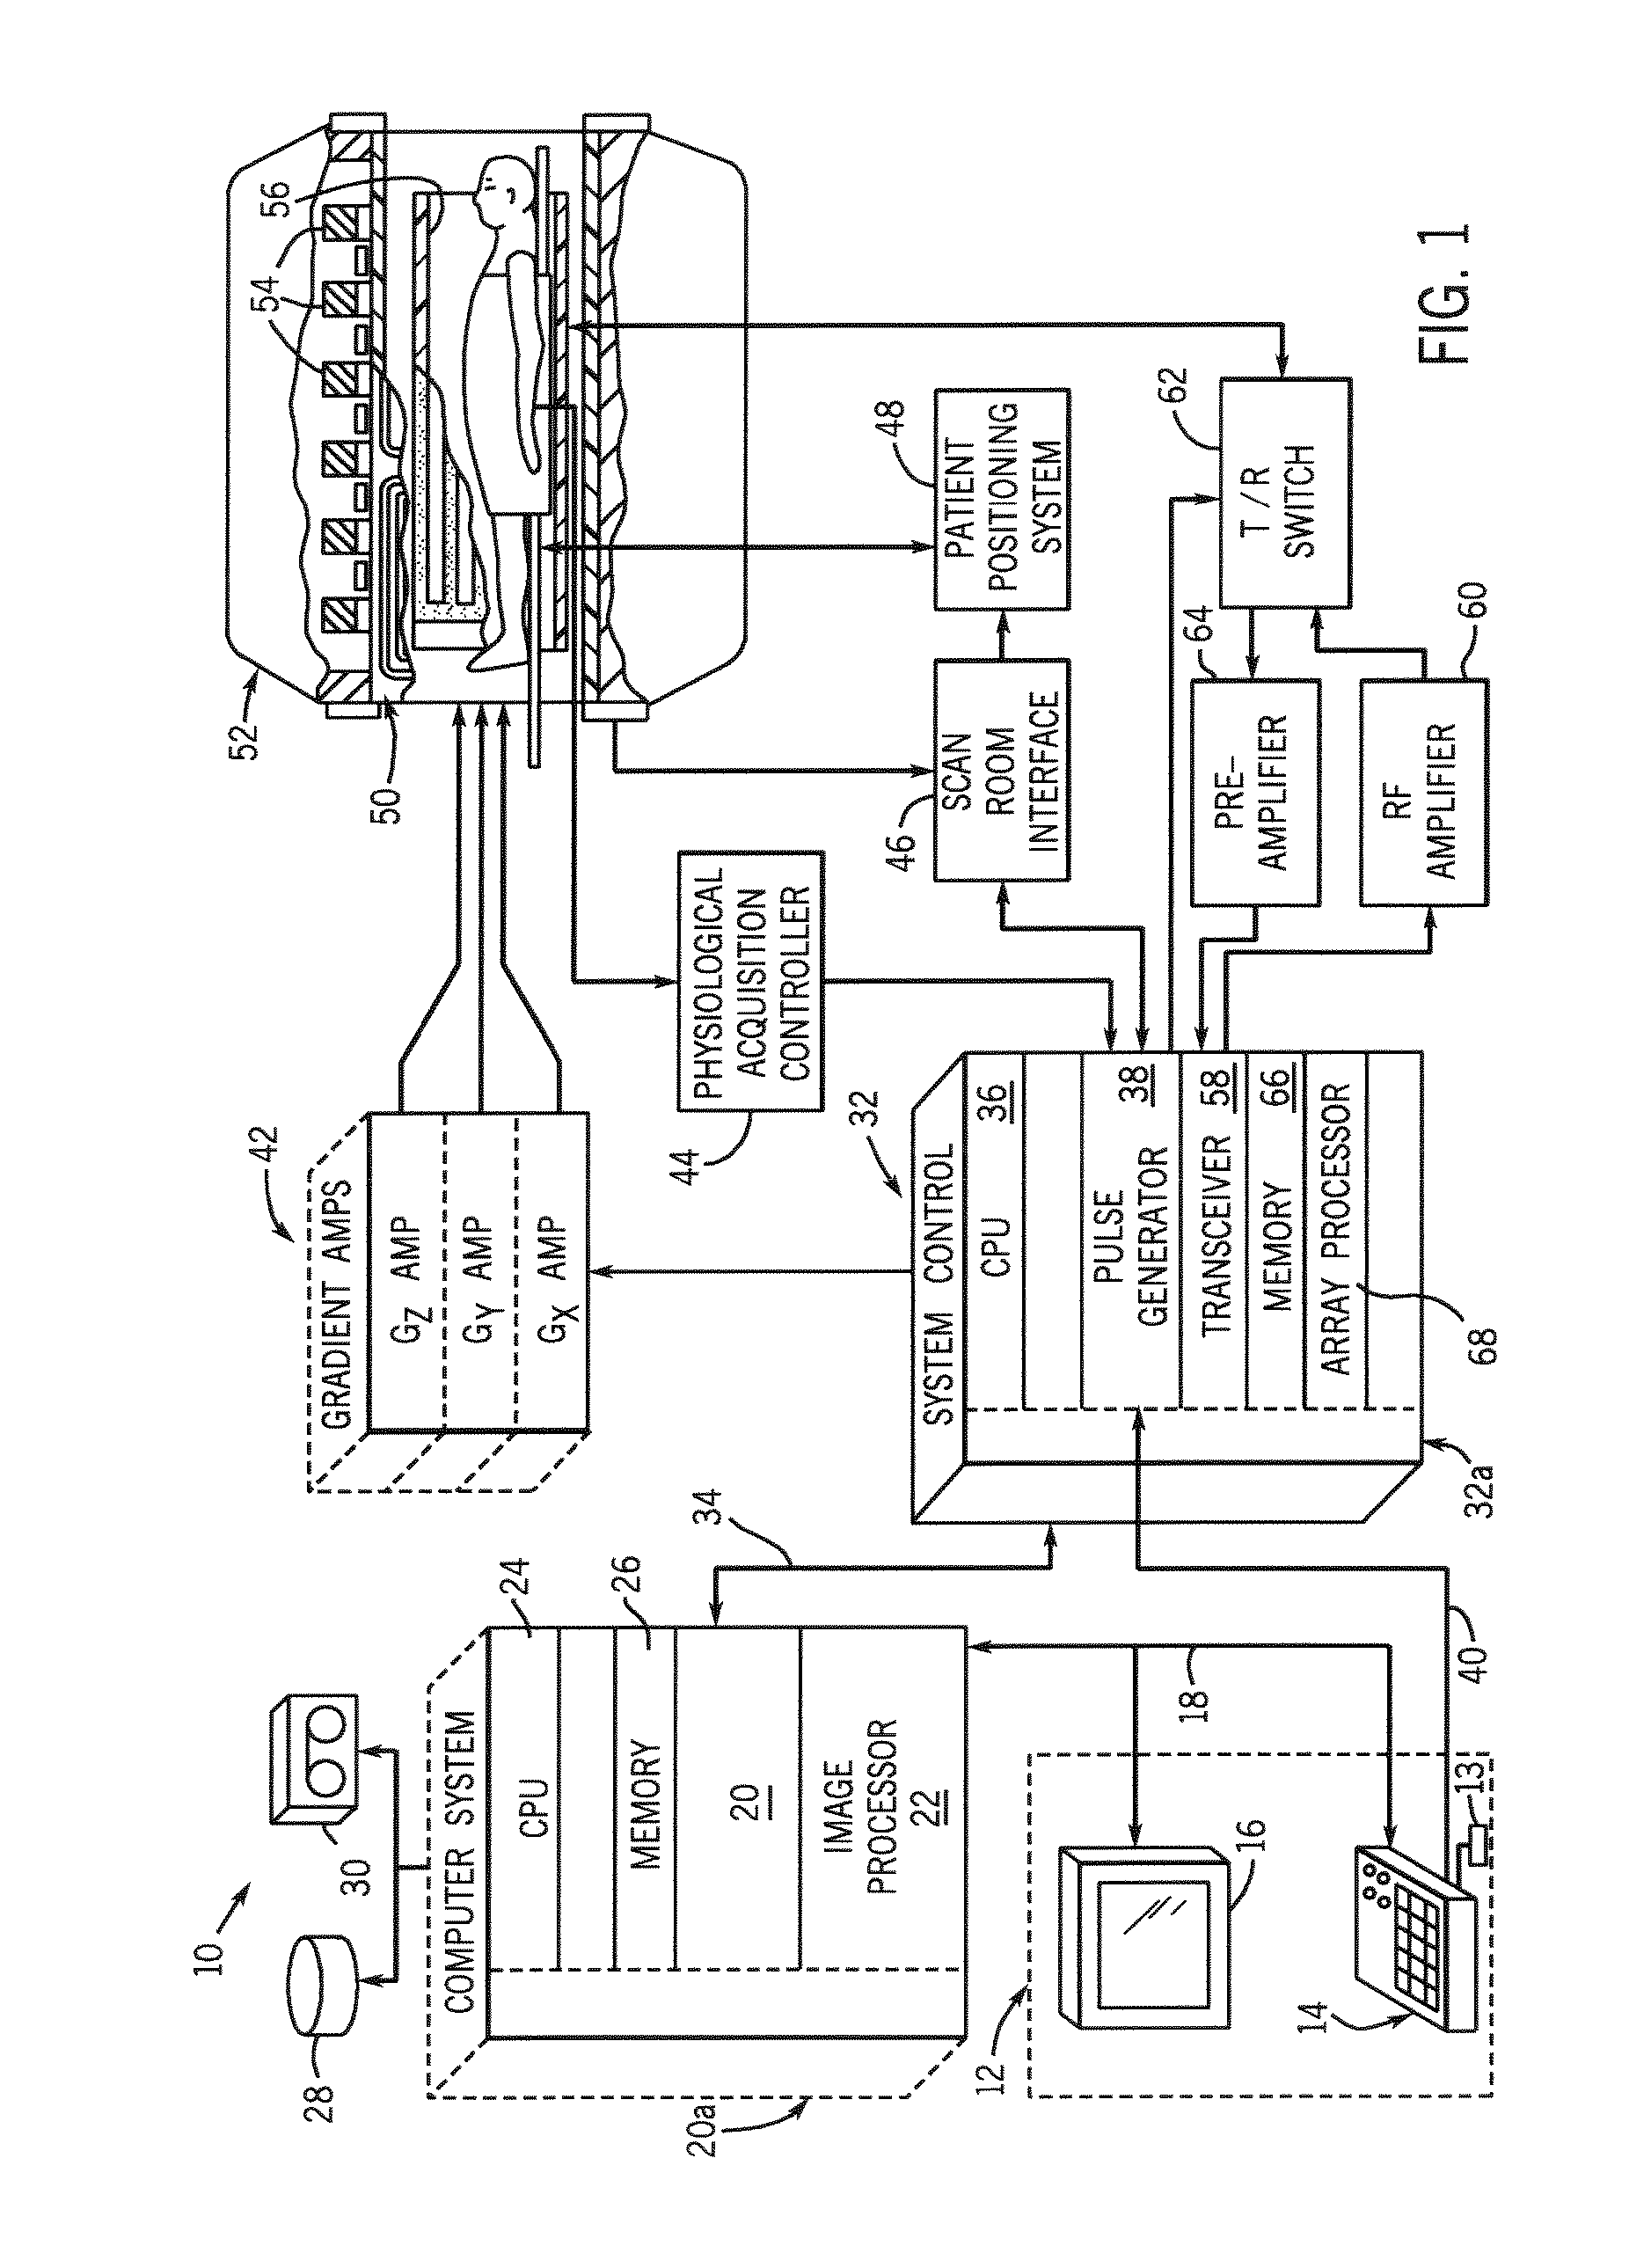 Method and apparatus to improve myocardial infarction detection with blood pool signal suppression